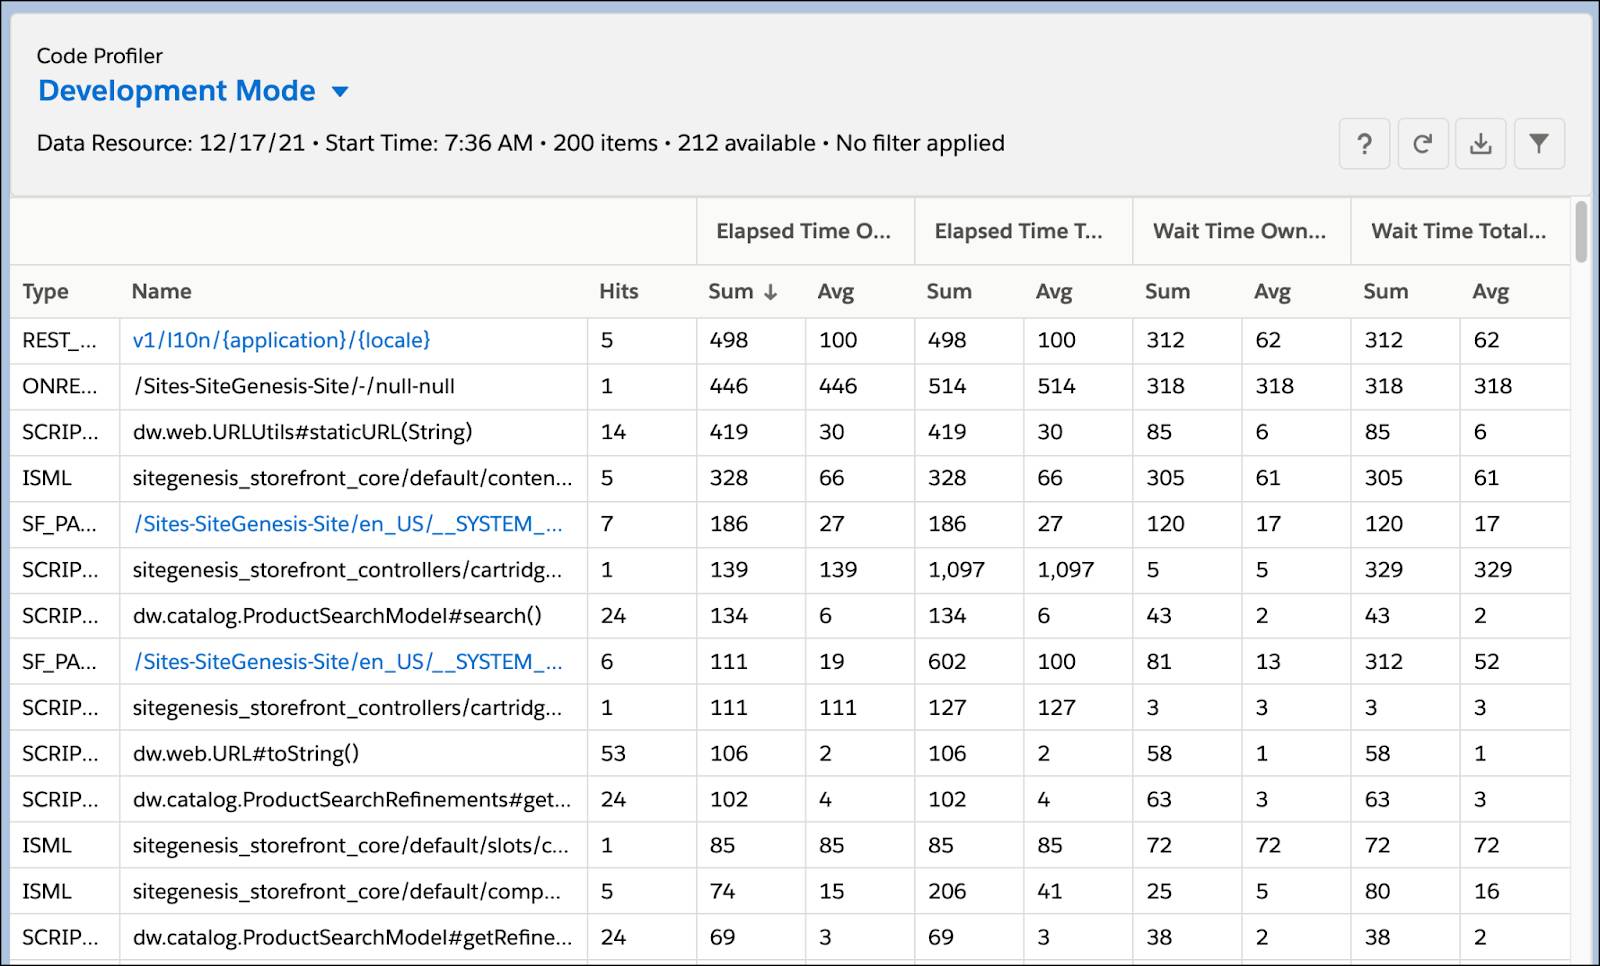 In Business Manager, the Code Profiler page shows Development mode for the development instance.